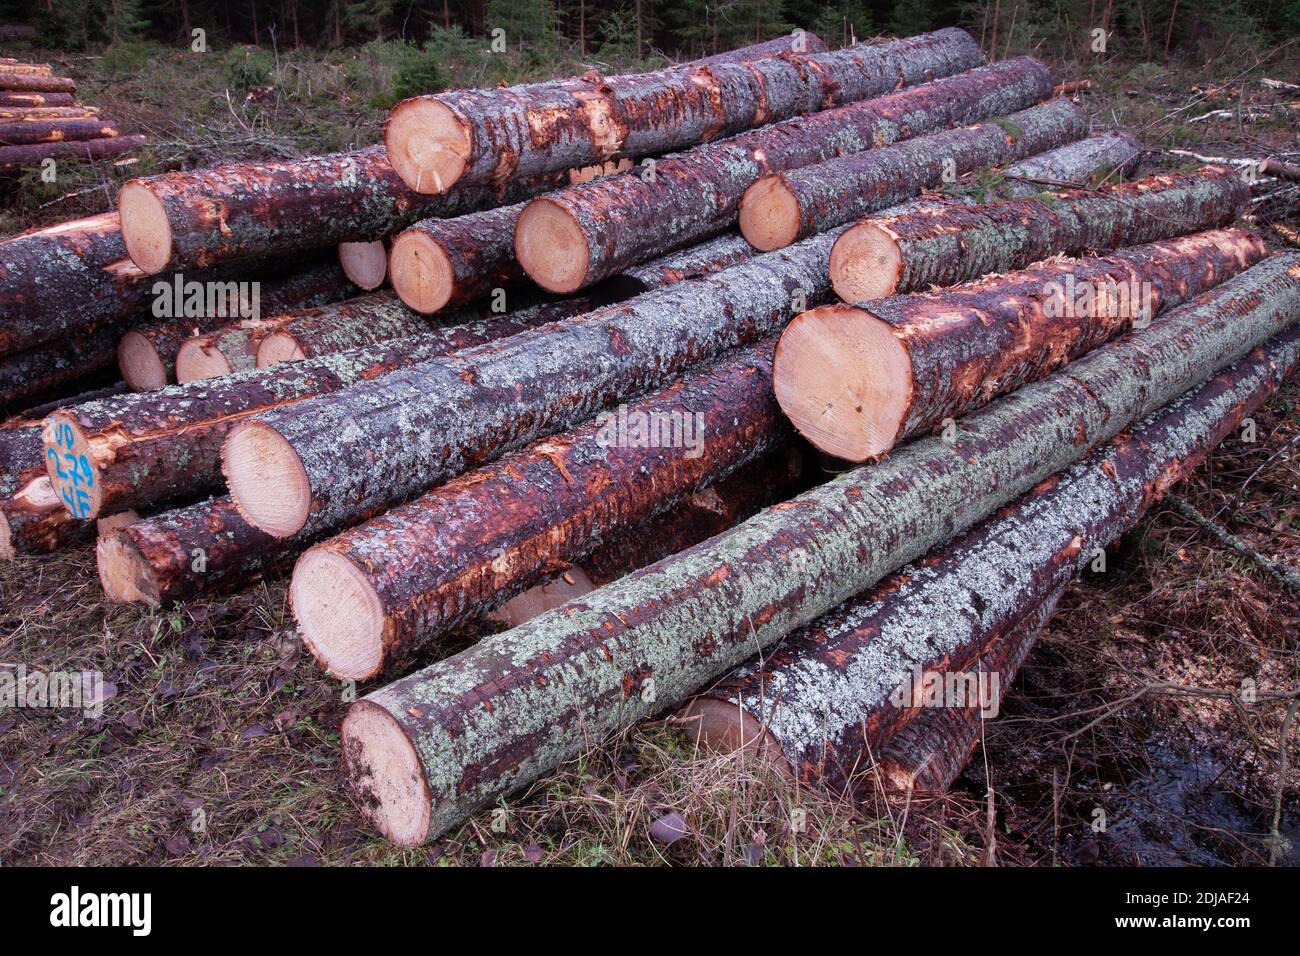 Freshly cut and piled lumber conifer trees as a raw material resource for wood industry in Estonia. Stock Photo